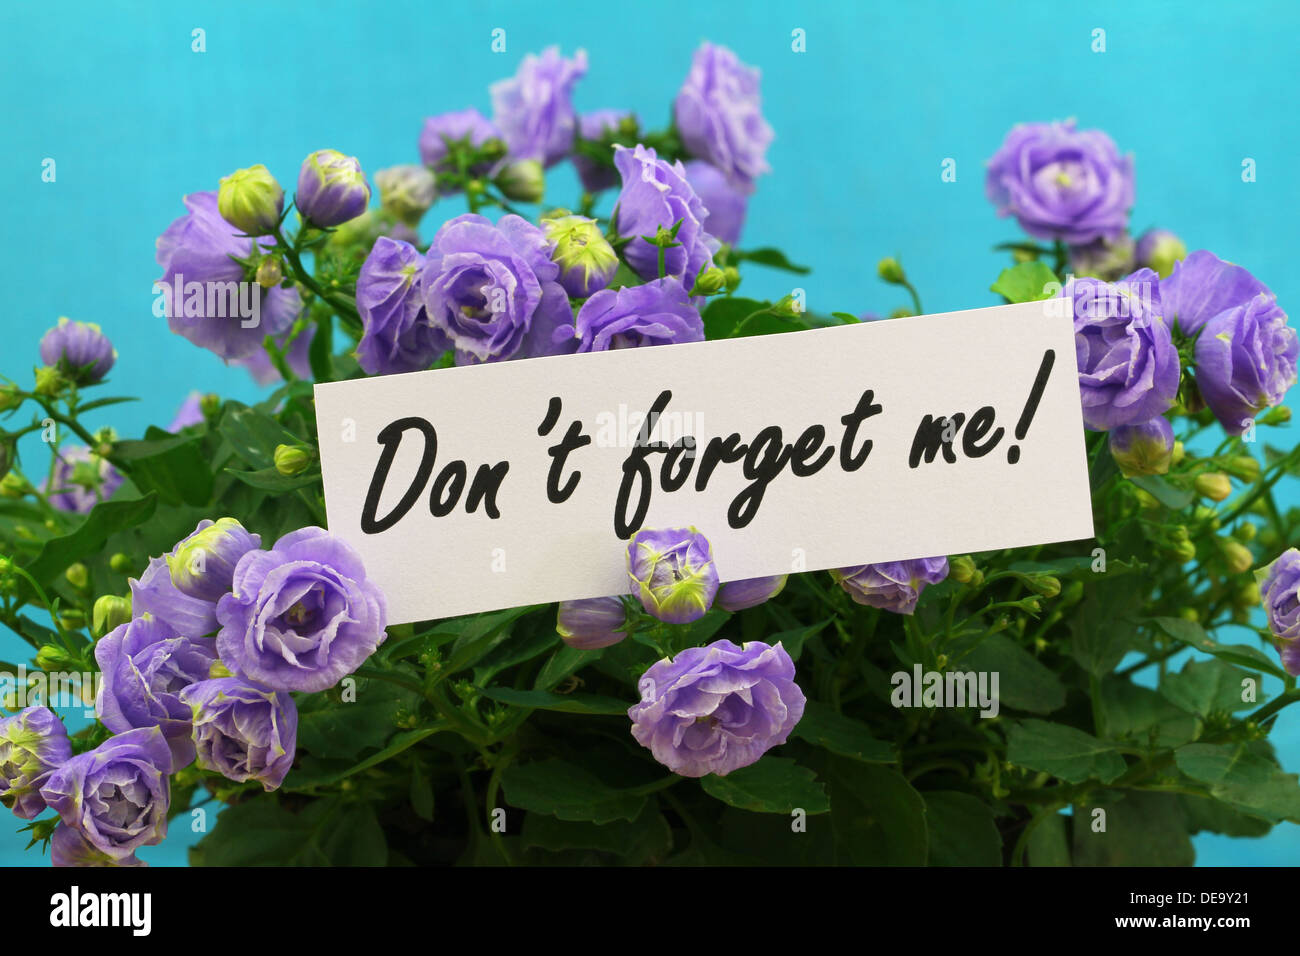 Don't forget me card with purple campanula flowers Stock Photo